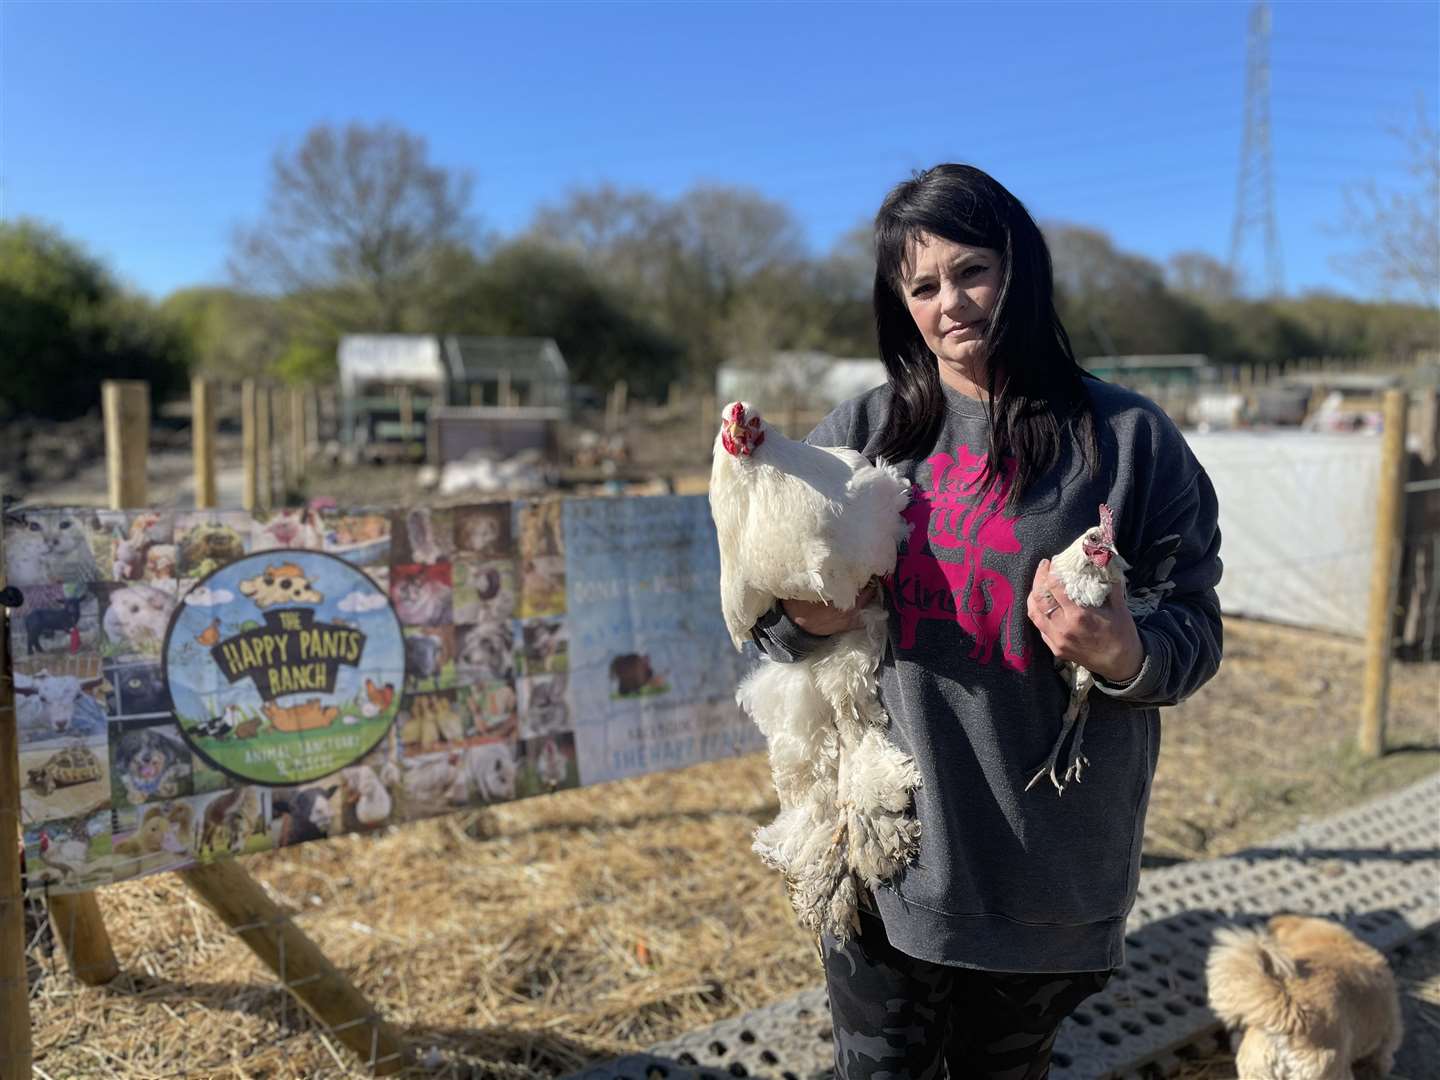 Founder Amey James with cockerels at The Happy Pants Ranch animal sanctuary in Iwade Lane, Bobbing